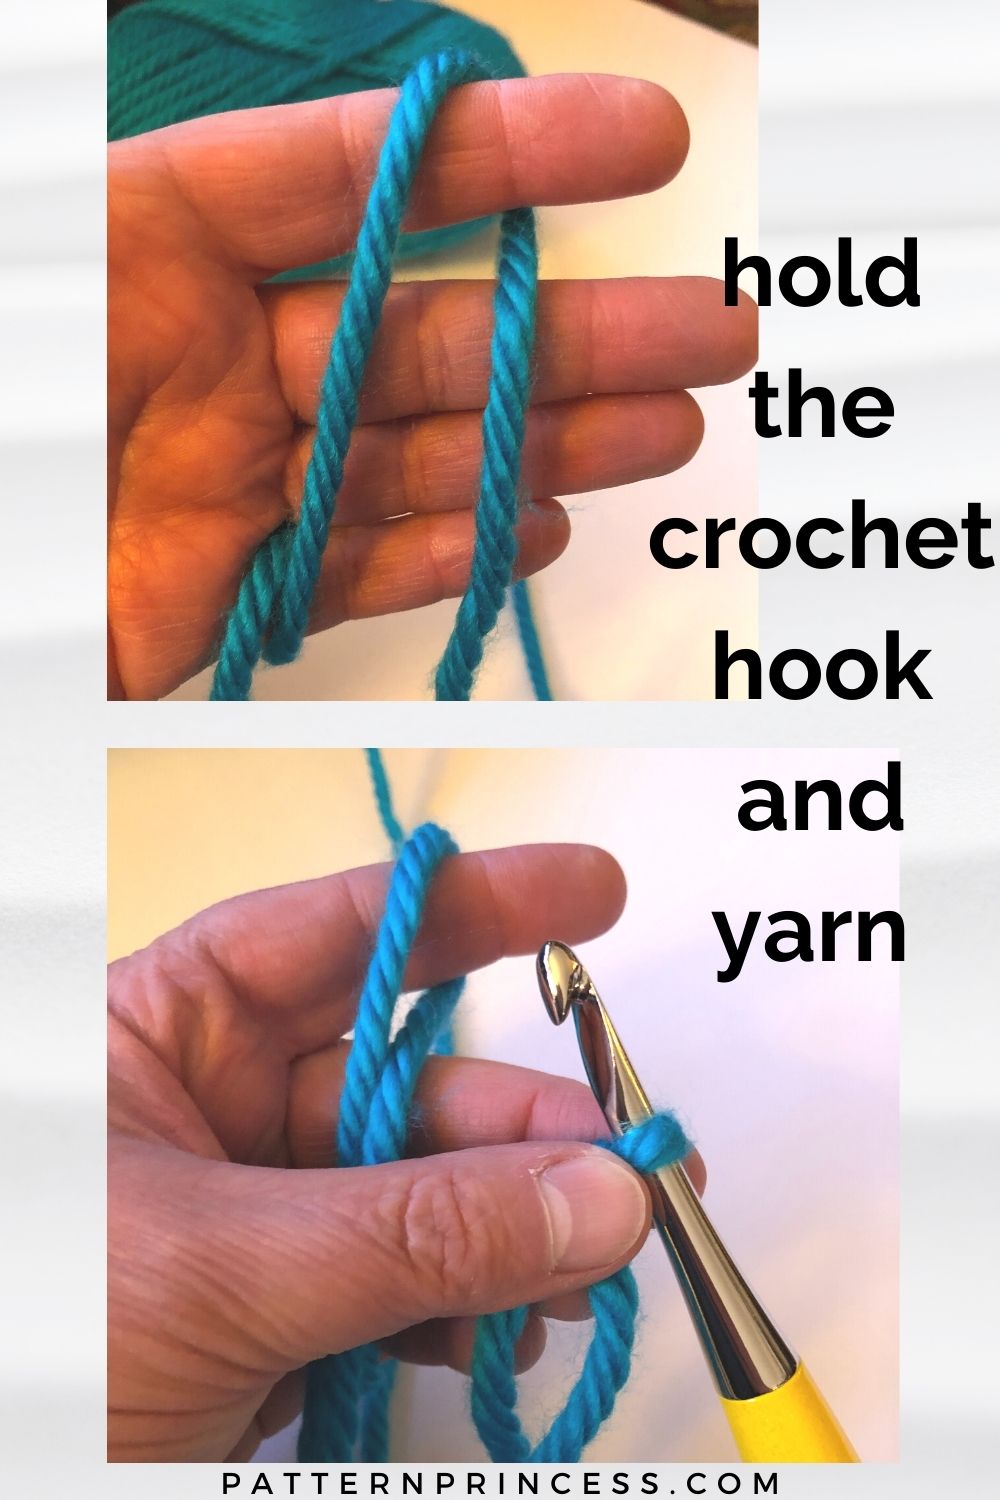 hold the crochet hook and yarn